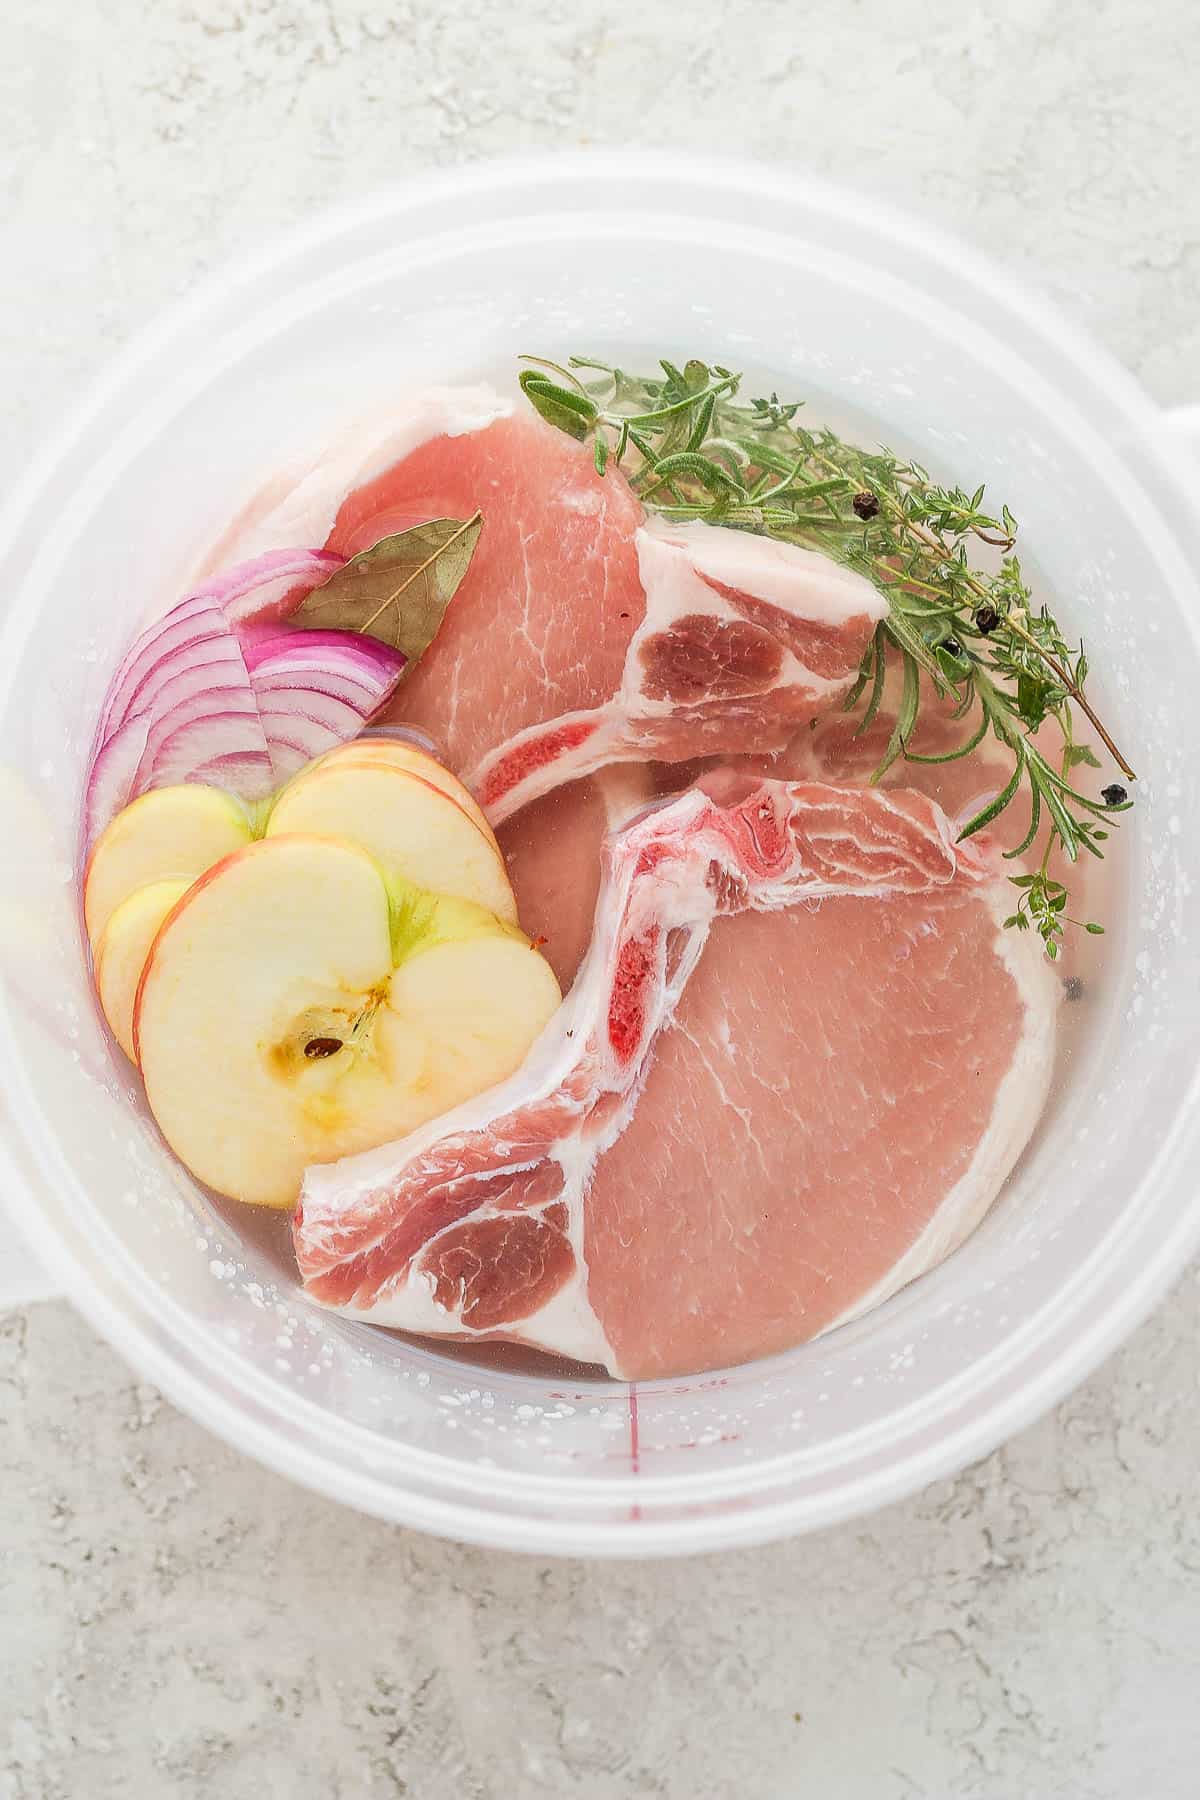 A top down image of pork chops, fresh herbs, onion, and apple slices submerged in a food safe container.